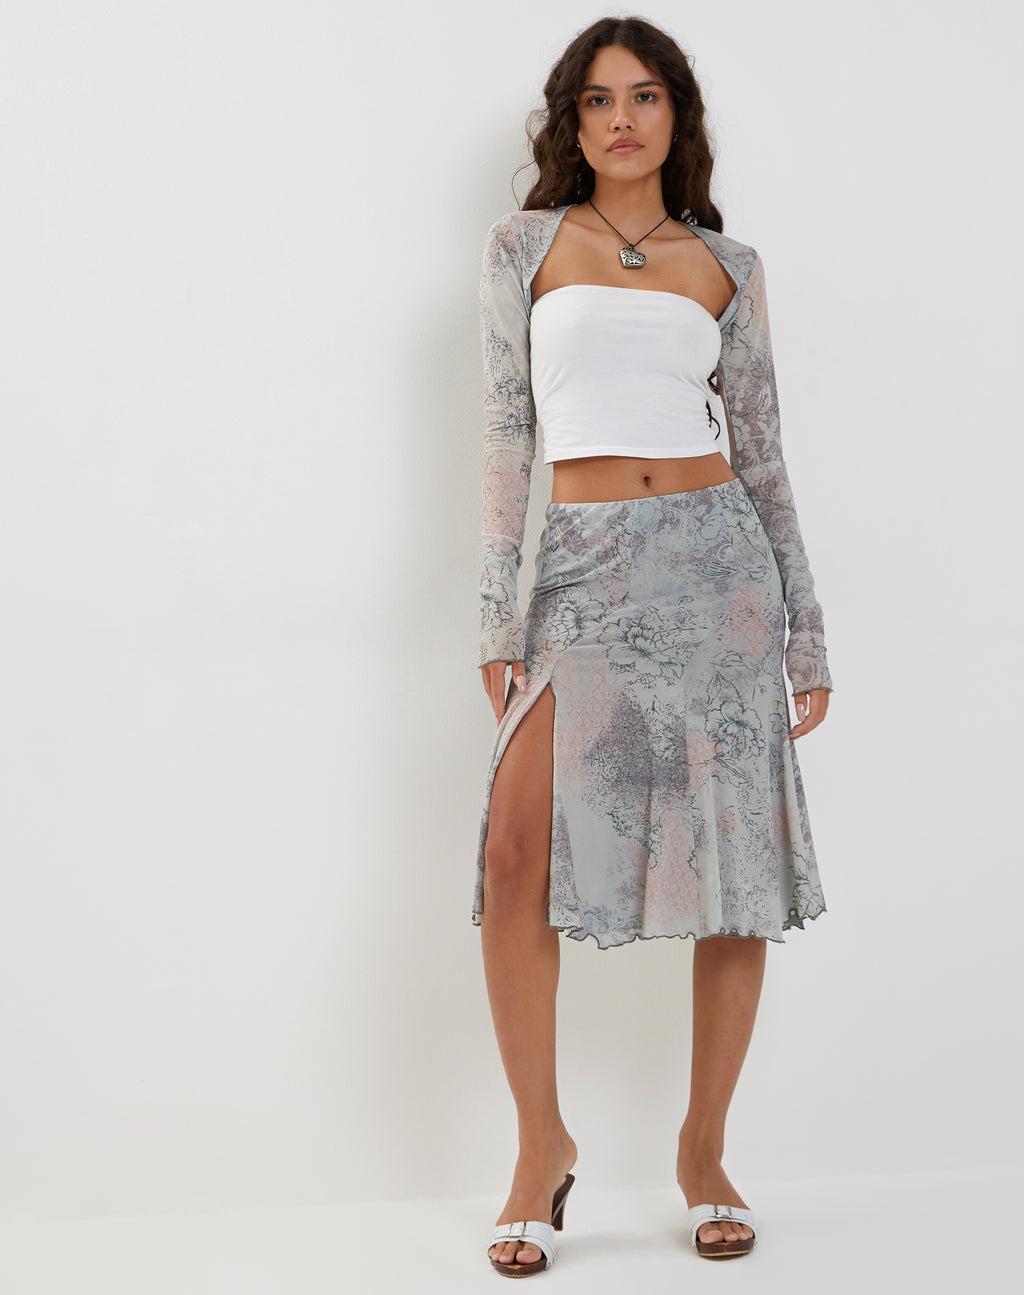 Sloane Midi Skirt in Pastel Floral Lace